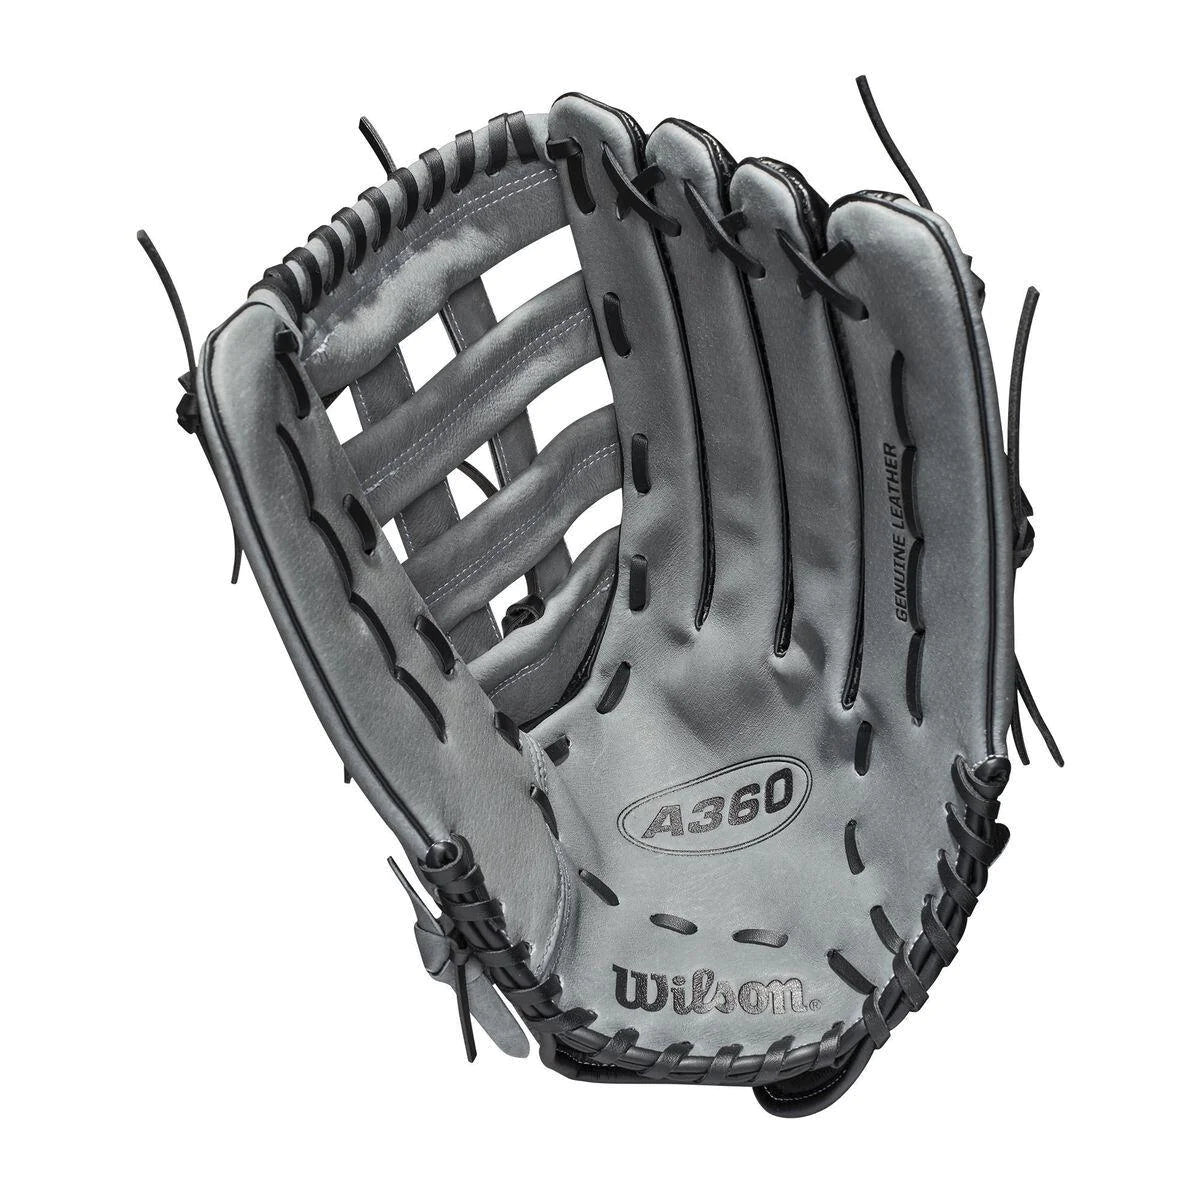 Wilson A360 15" Slo-Pitch Glove - Right Hand Throw Inside Black and Grey